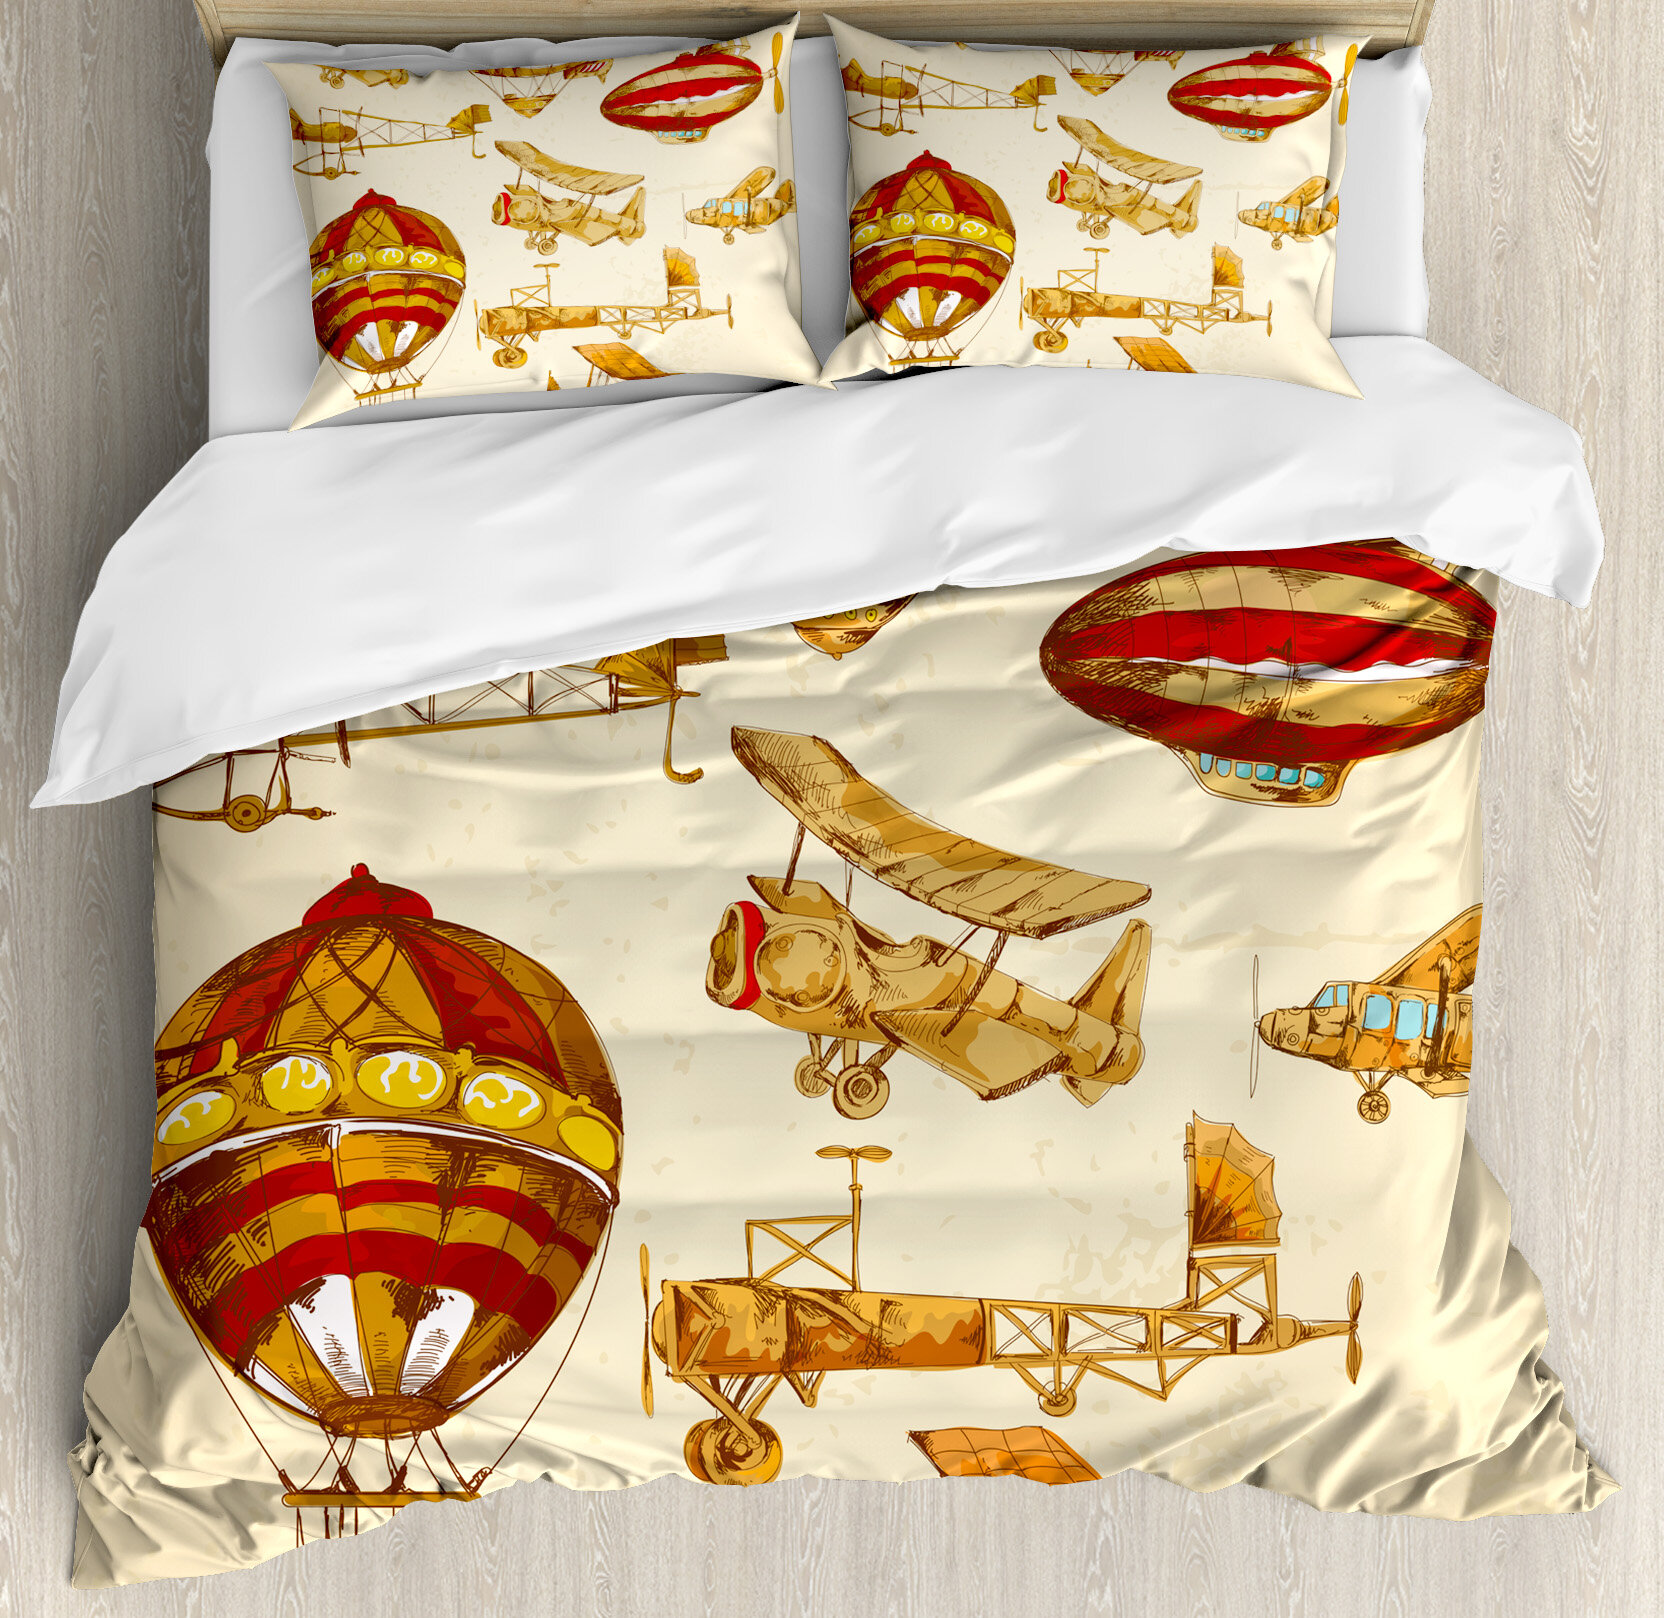 Duvet Covers Planes Fying In Air Aviation Love Airport Helicopters